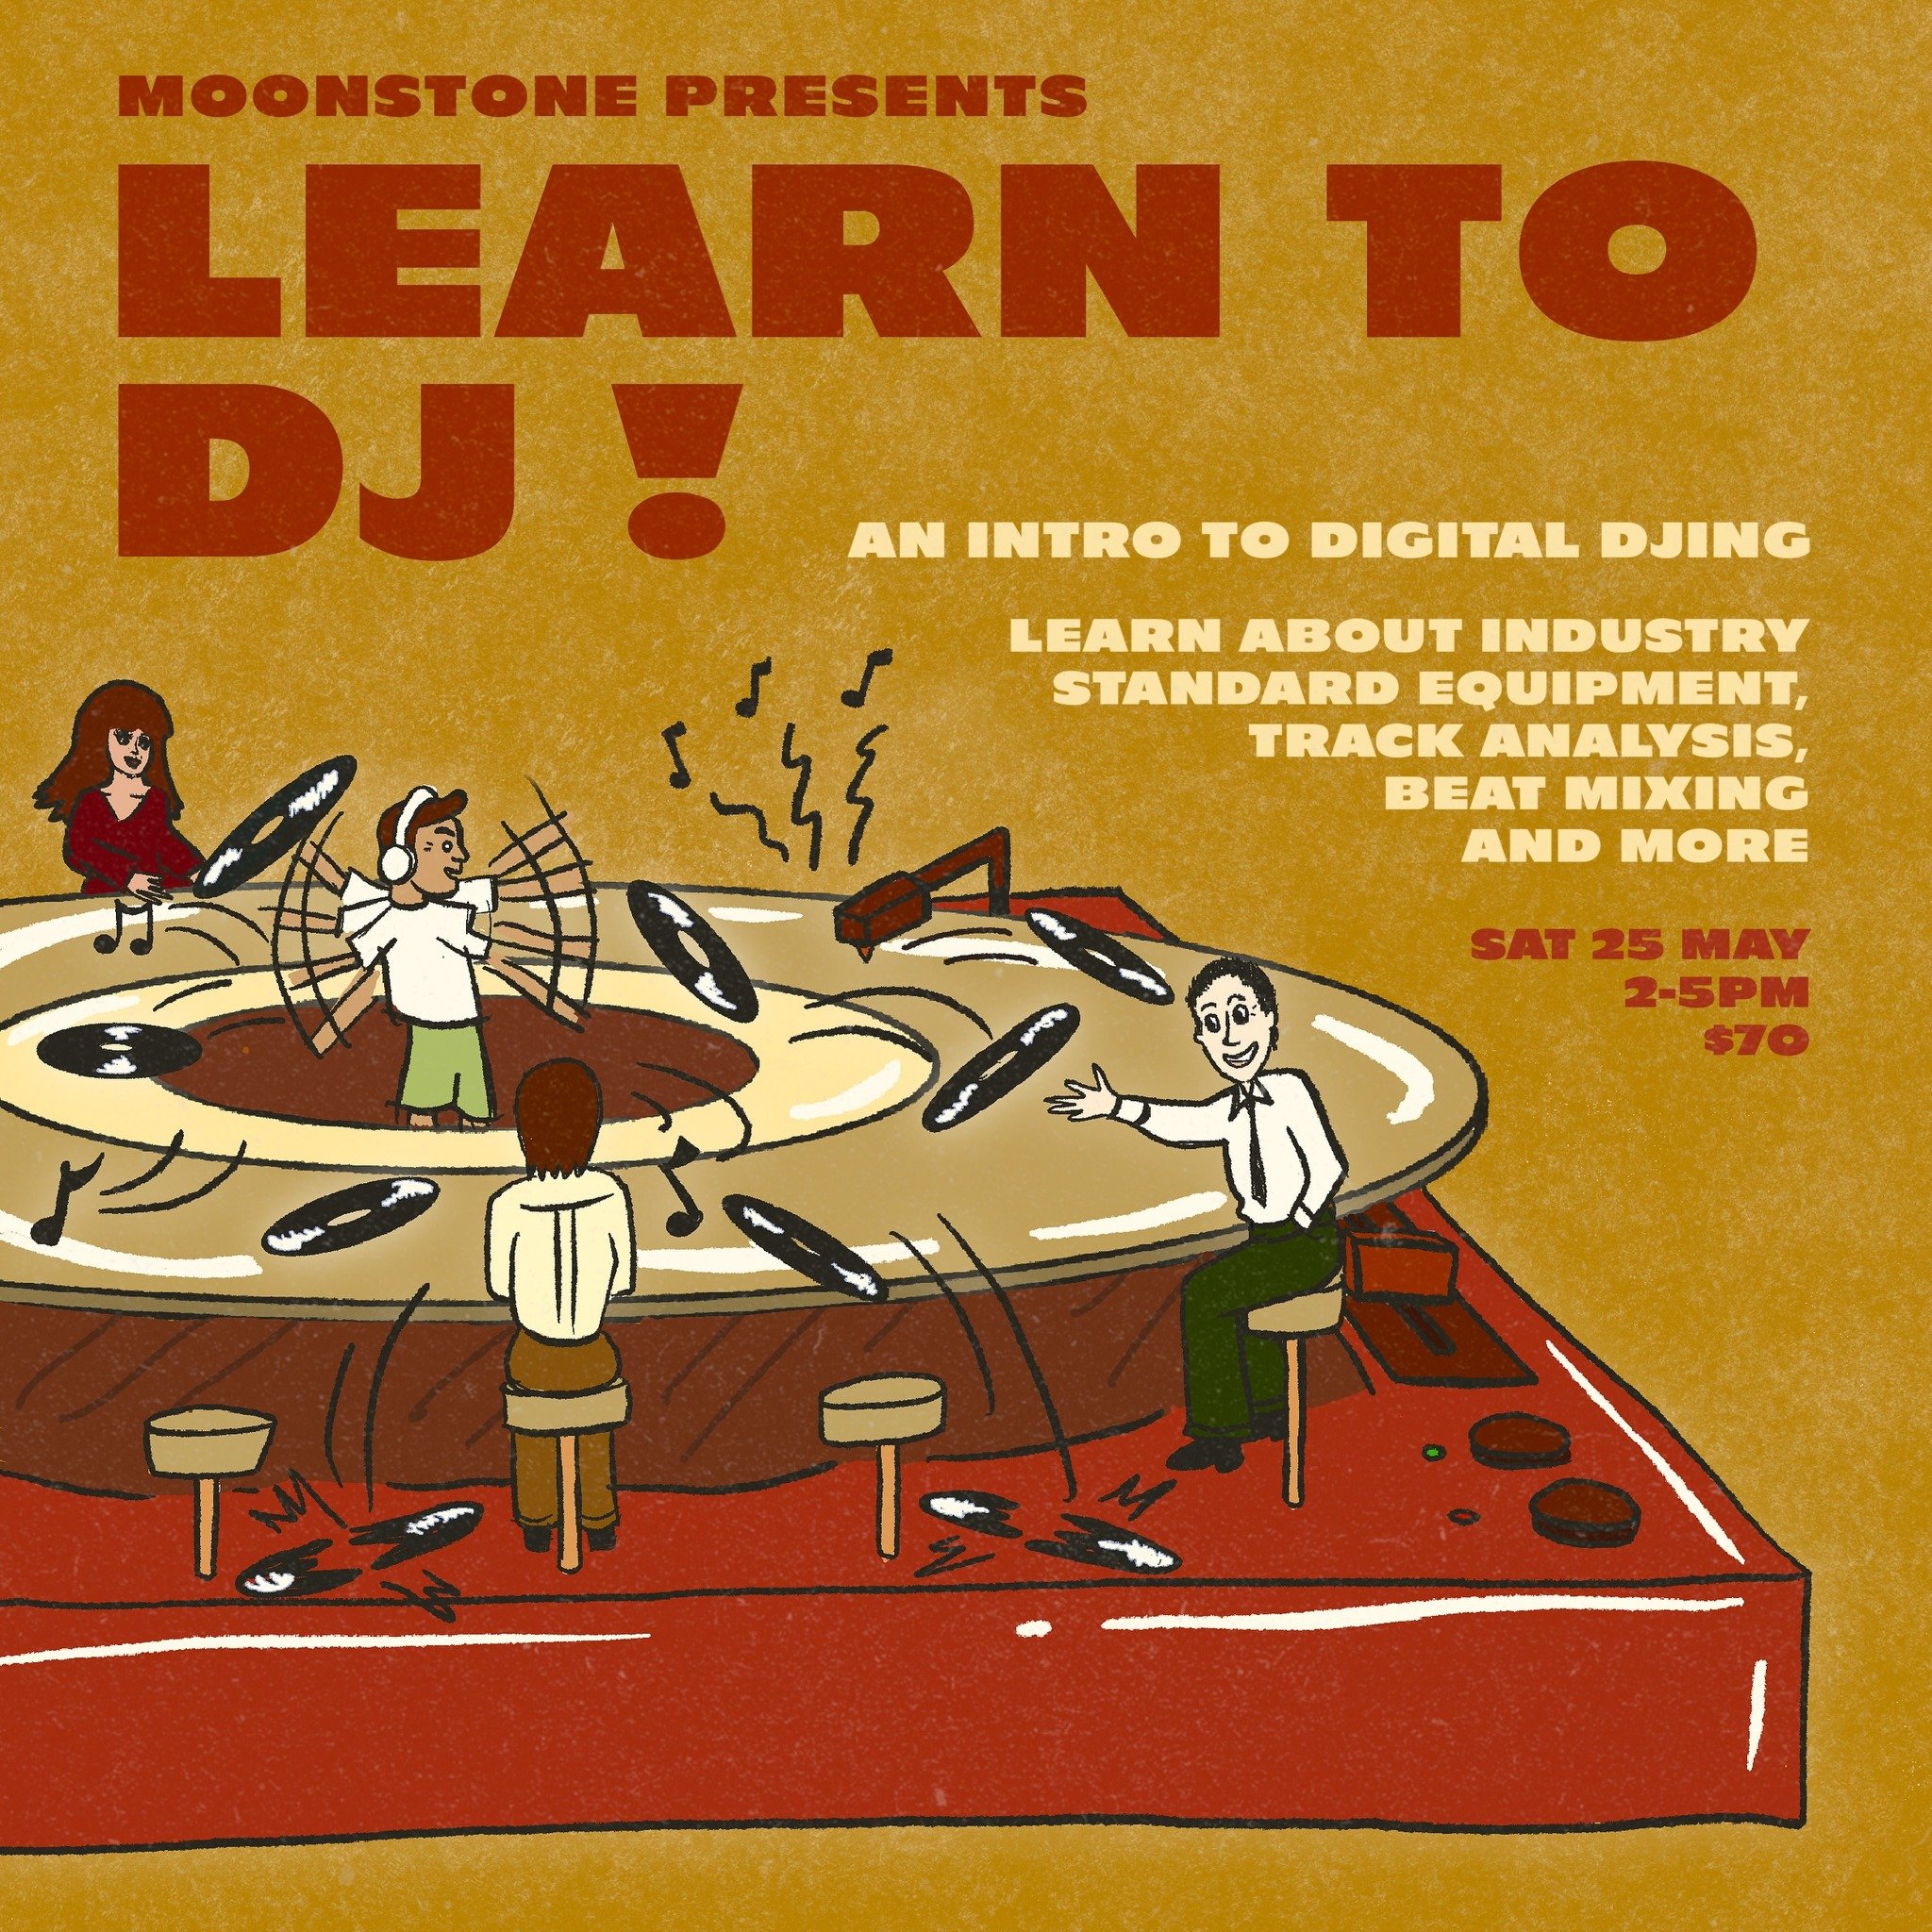 Learn how to DJ with Moonstone! Whether you&rsquo;re a complete newbie or bedroom DJ of 6 months, there&rsquo;s plenty you can learn from this 3h beginner&rsquo;s DJ workshop. 

The 3h workshop will cover: 
Introduction to Digital DJing
* Introductio